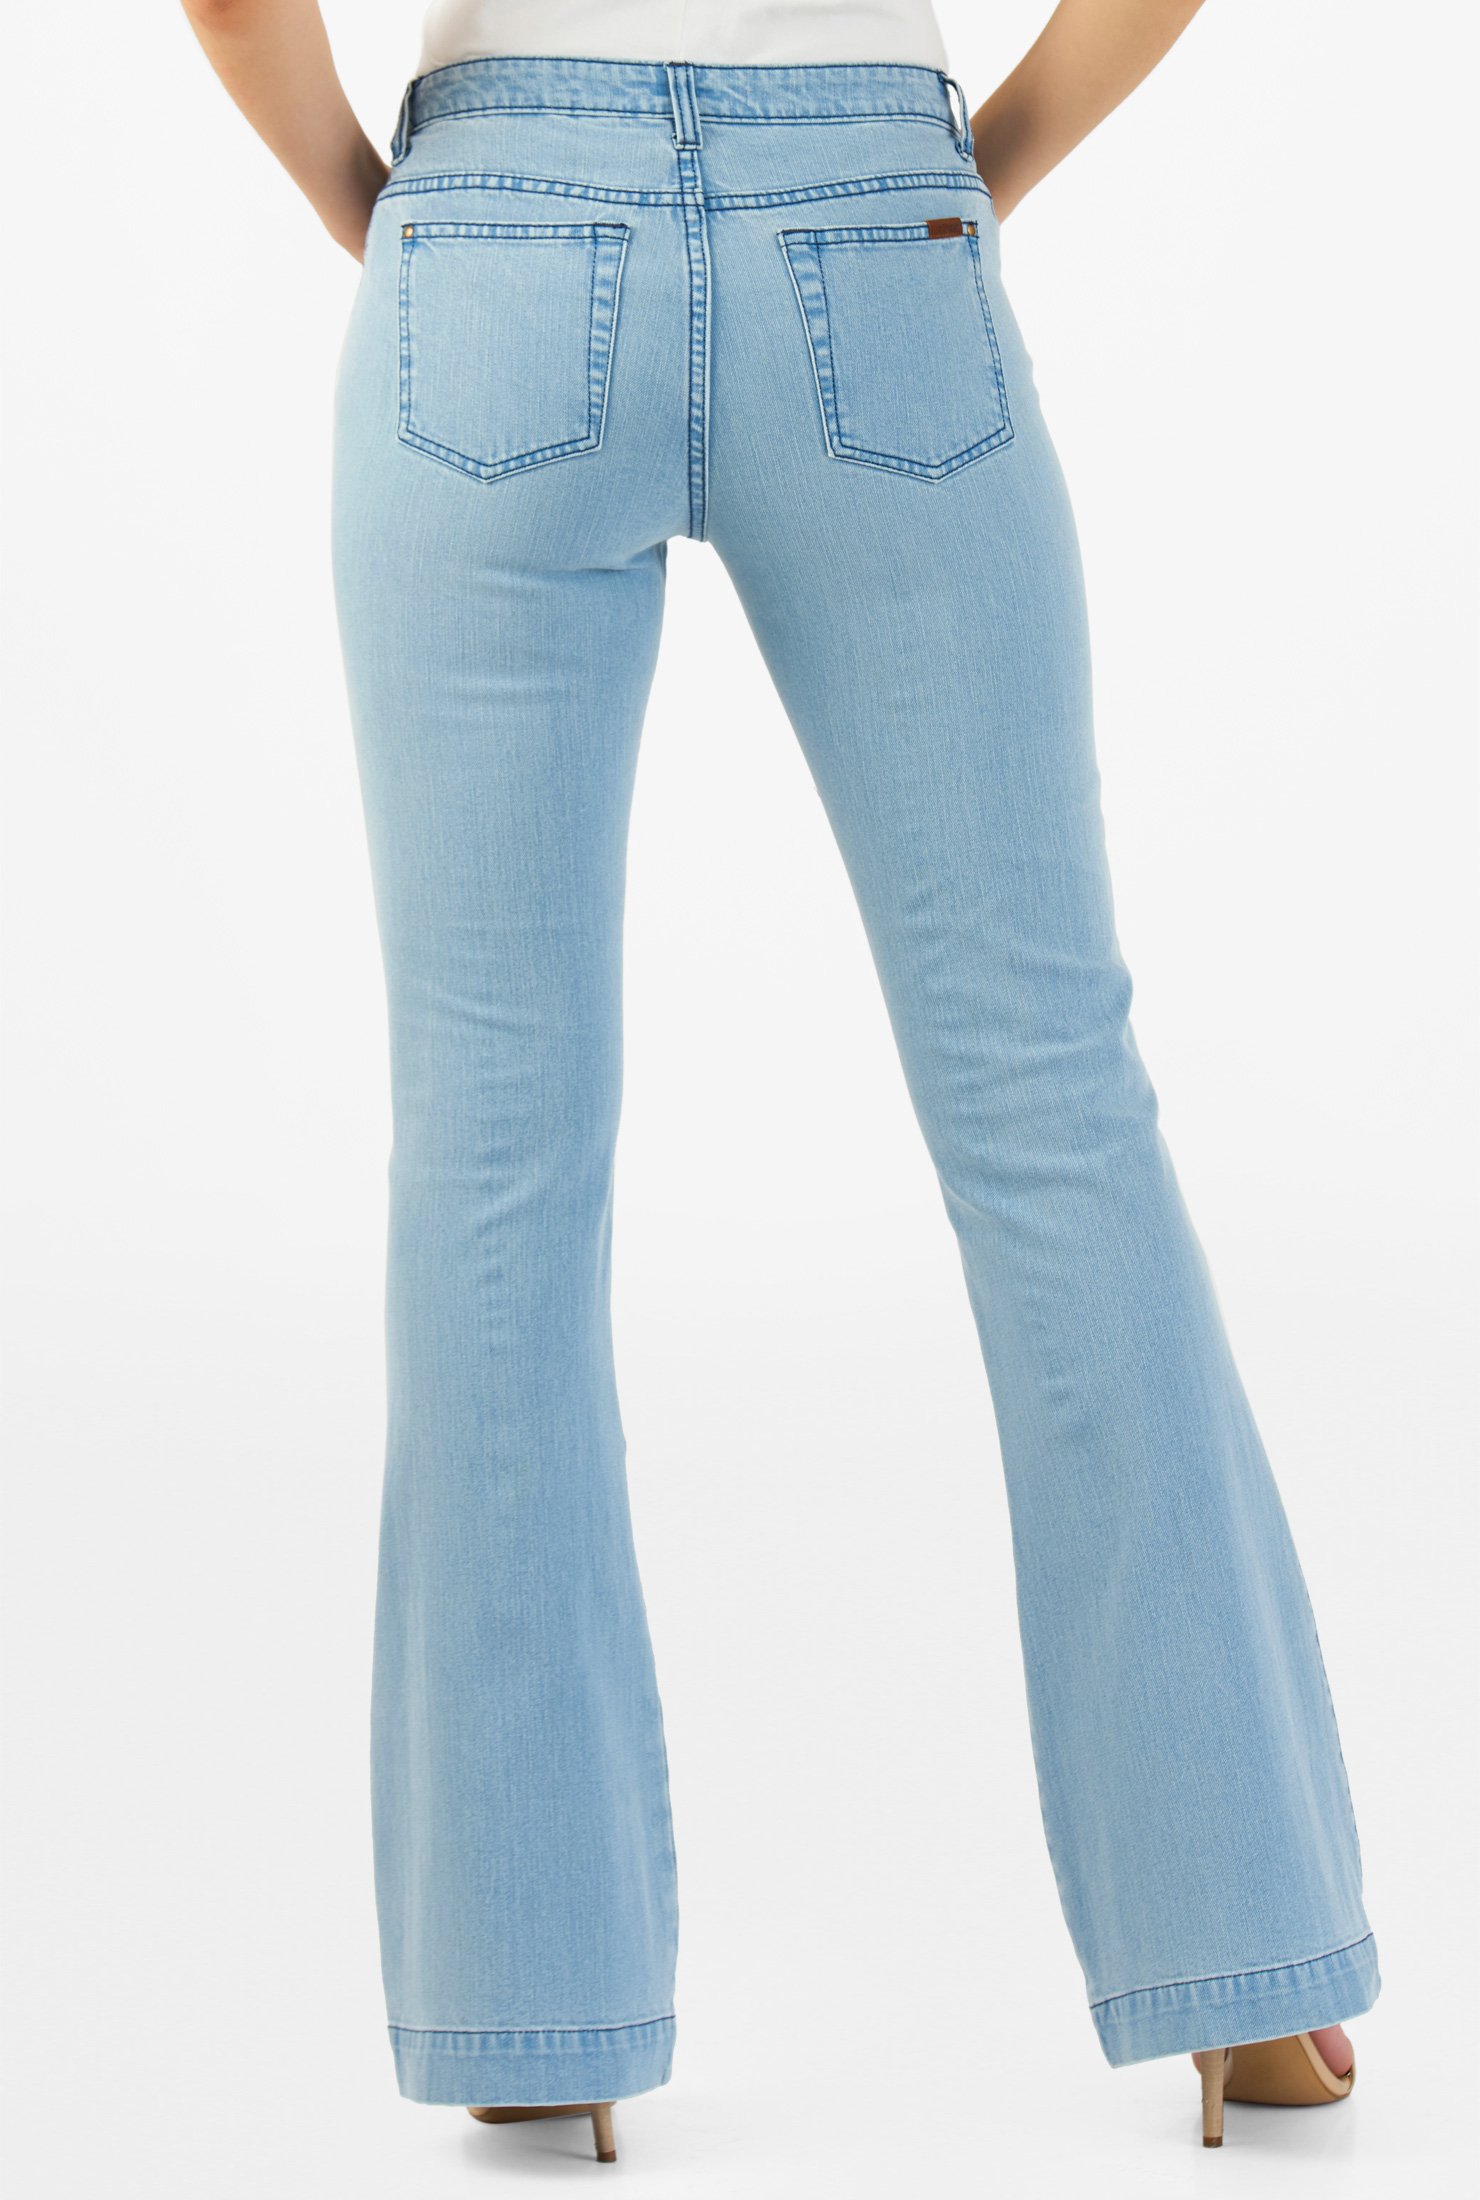 ice blue jeans for ladies